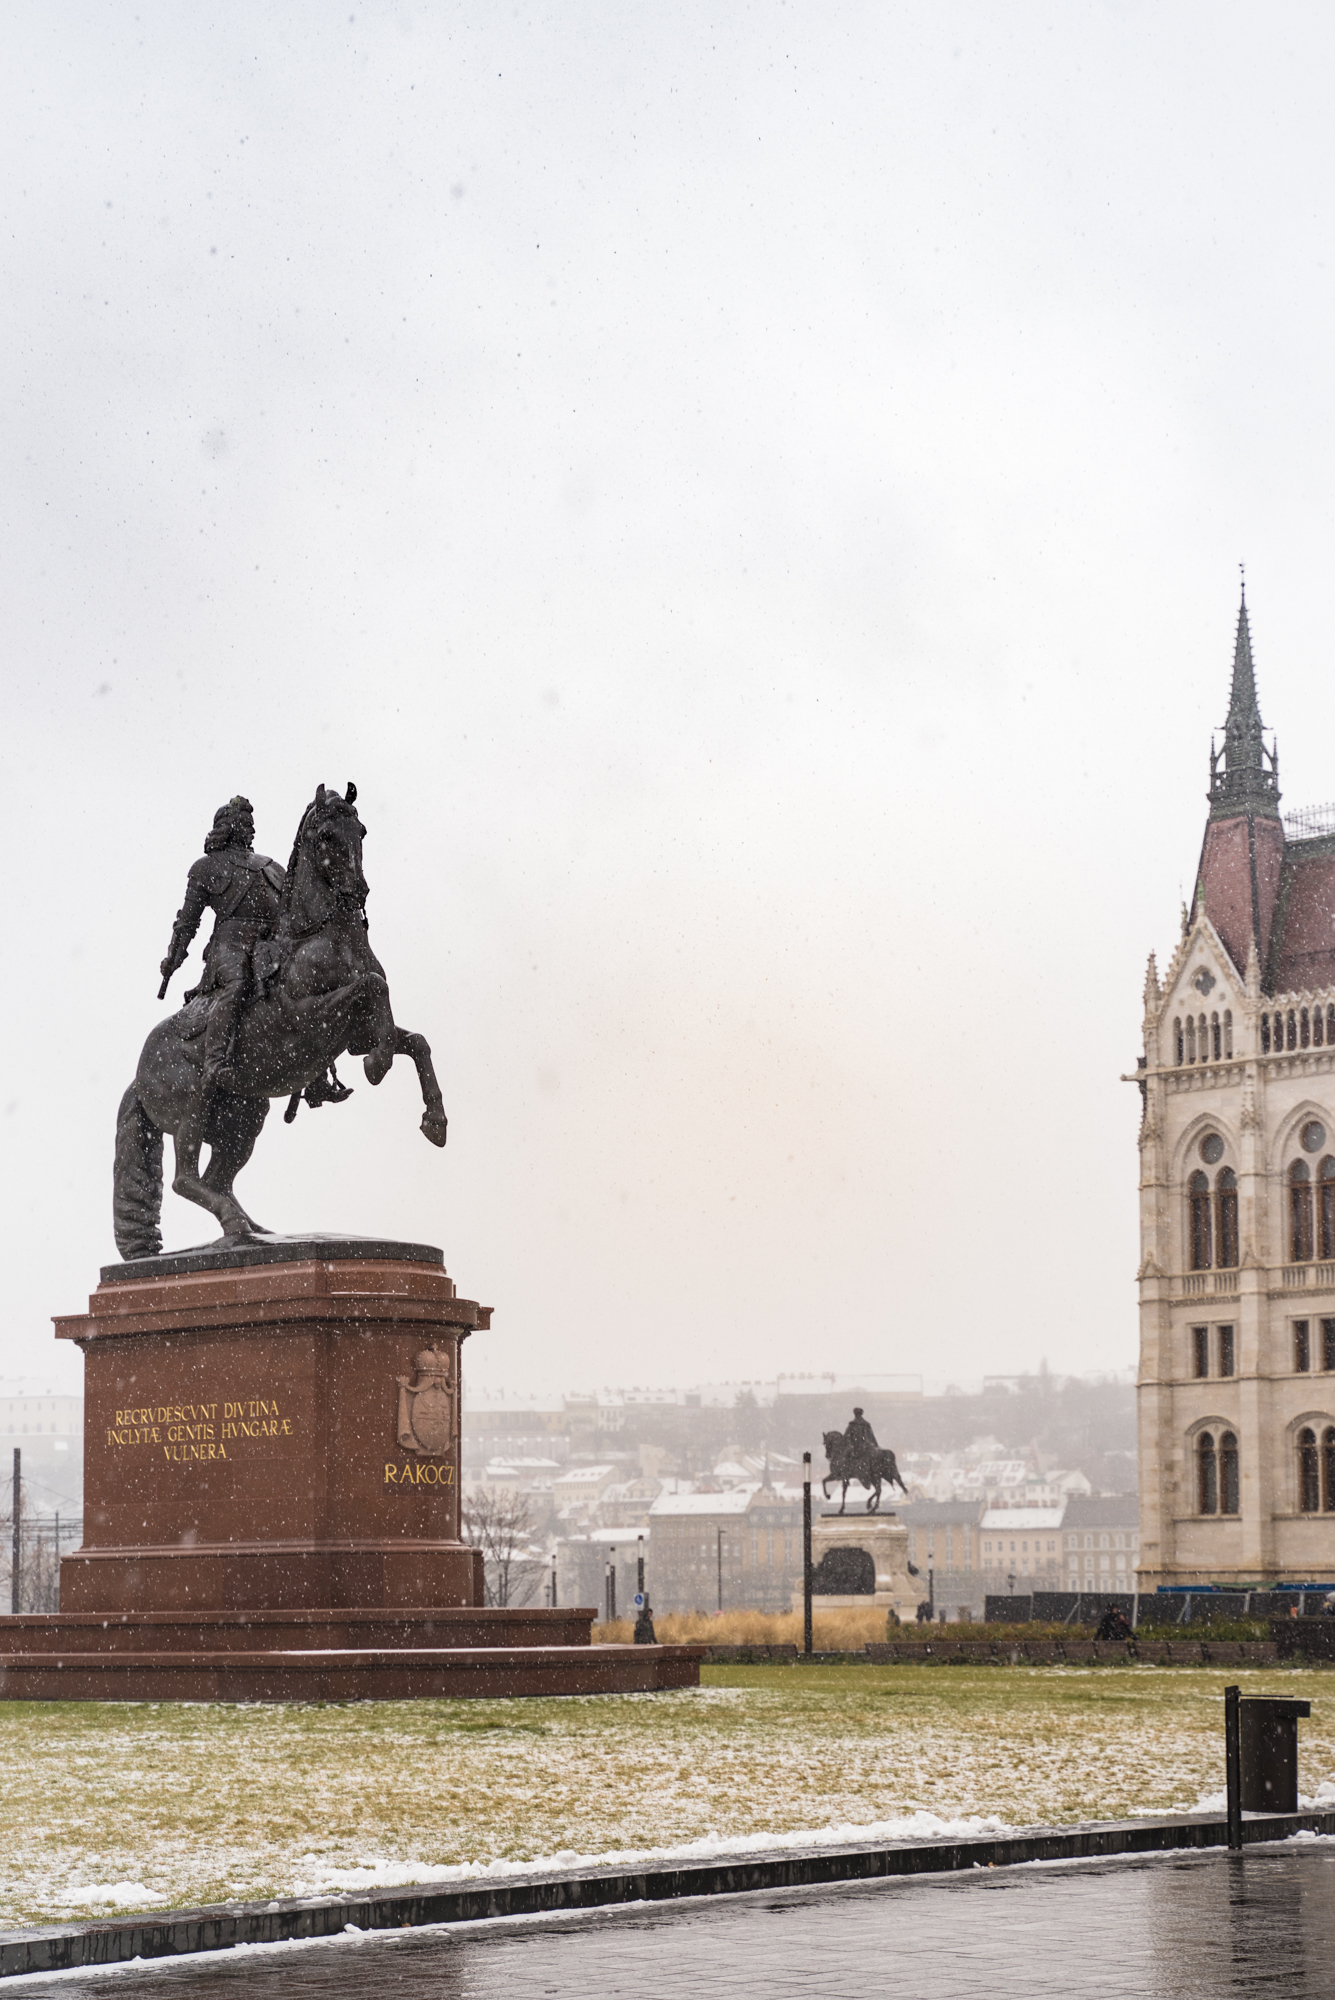 Two equestrian statues located near the parliament